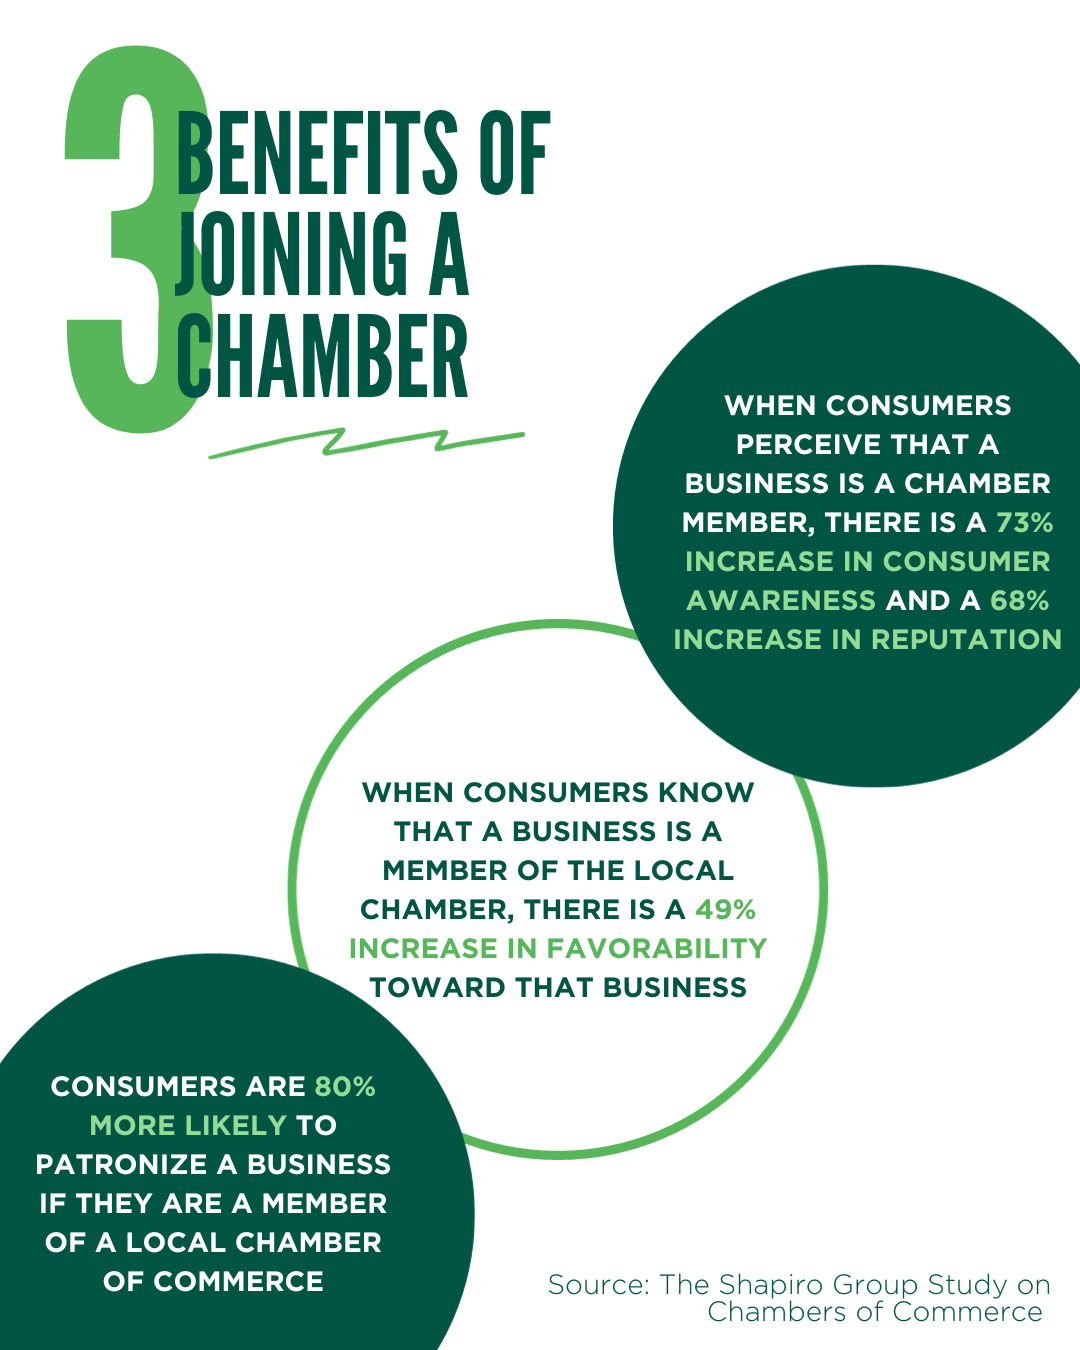 3 Benefits of Joining a Chamber. When consumers perceive that a business is a Chamber member, there is a 73% increase in consumer awareness and 68% increase in reputaion. When consulers know that a business is a member of the local Chamber, there is a 49% increase in favorability towards that business. Consumers are 80% more likely to patronize a business if they are a member of a local Chamber of Commerce. Source: TheShapiro Group Study on Chambers of Commerce.